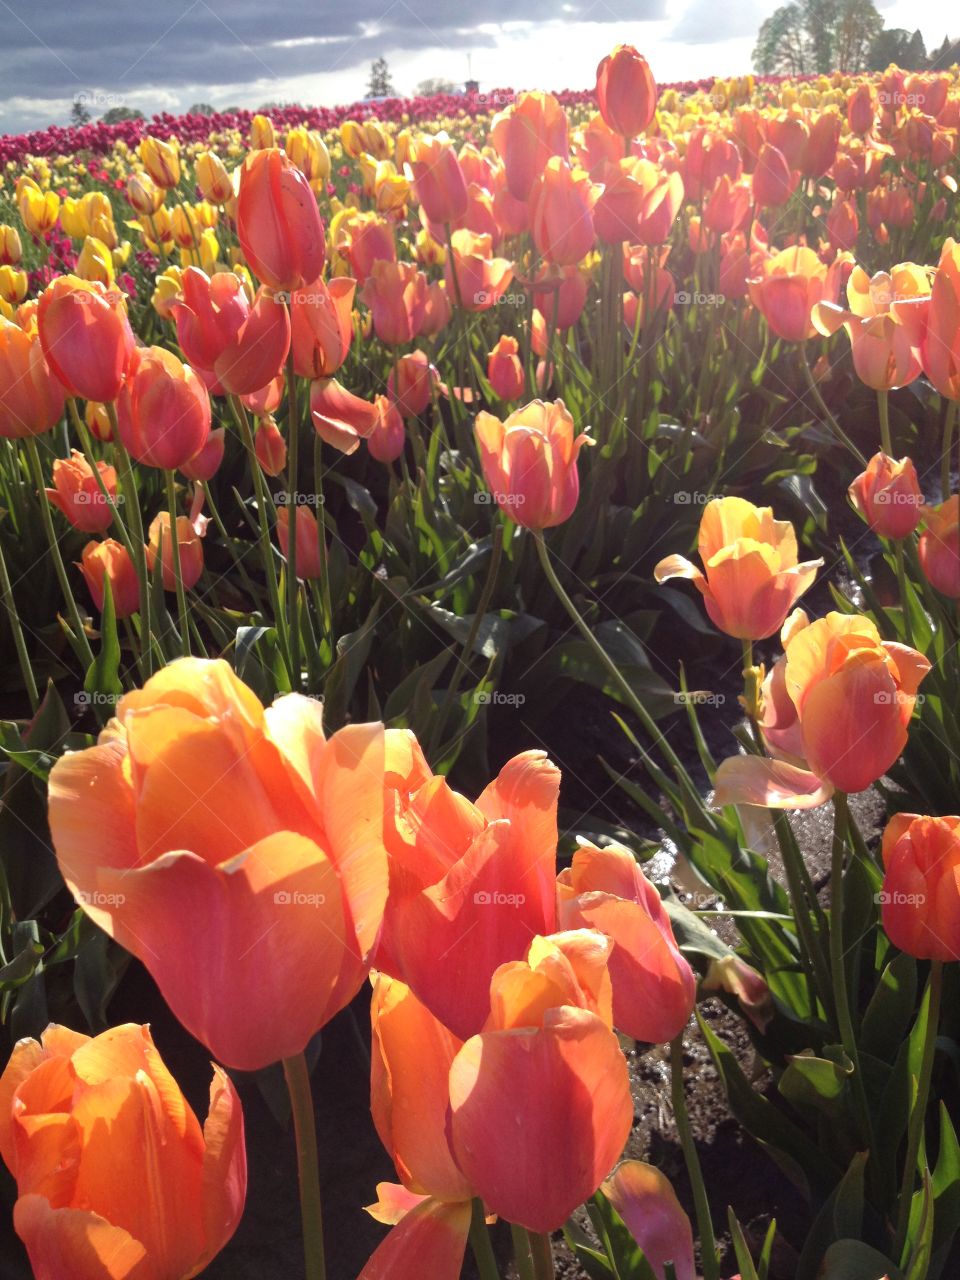 Field of Tasty. A delicious field of orange and yellow colored tulips bathed in midday sunlight.